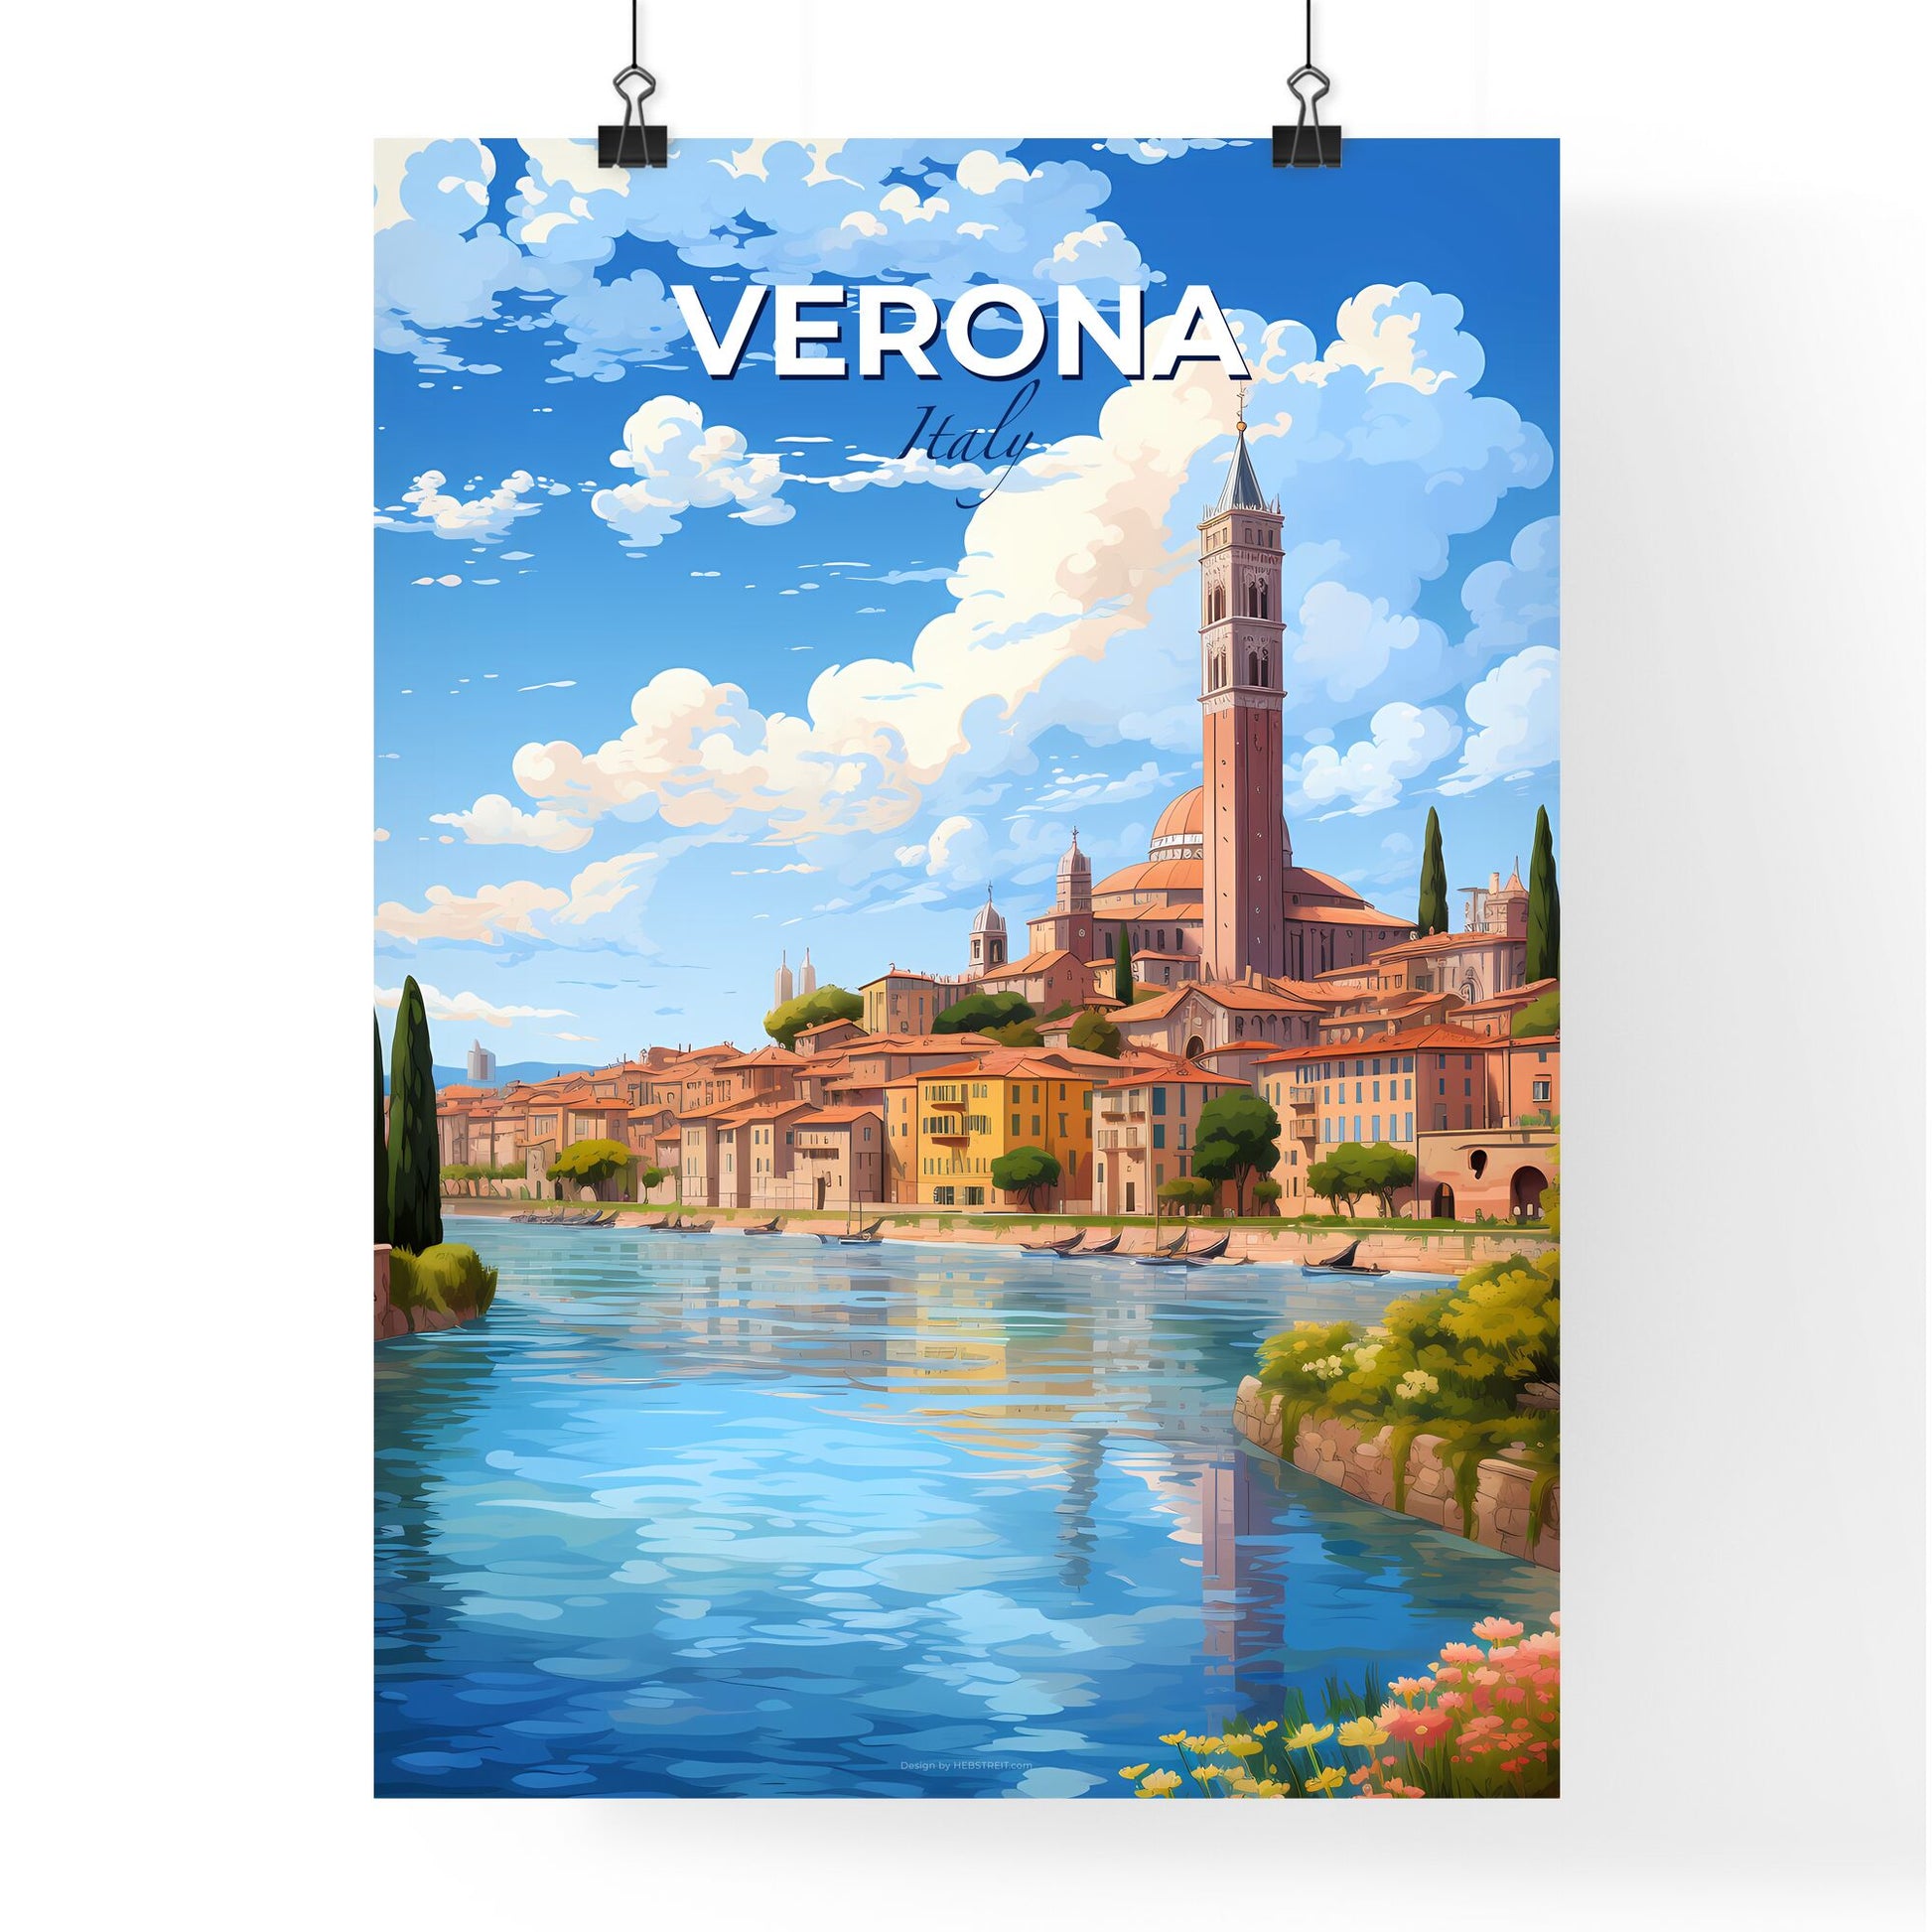 Verona Italy Skyline - A River With A City And Trees - Customizable Travel Gift Default Title